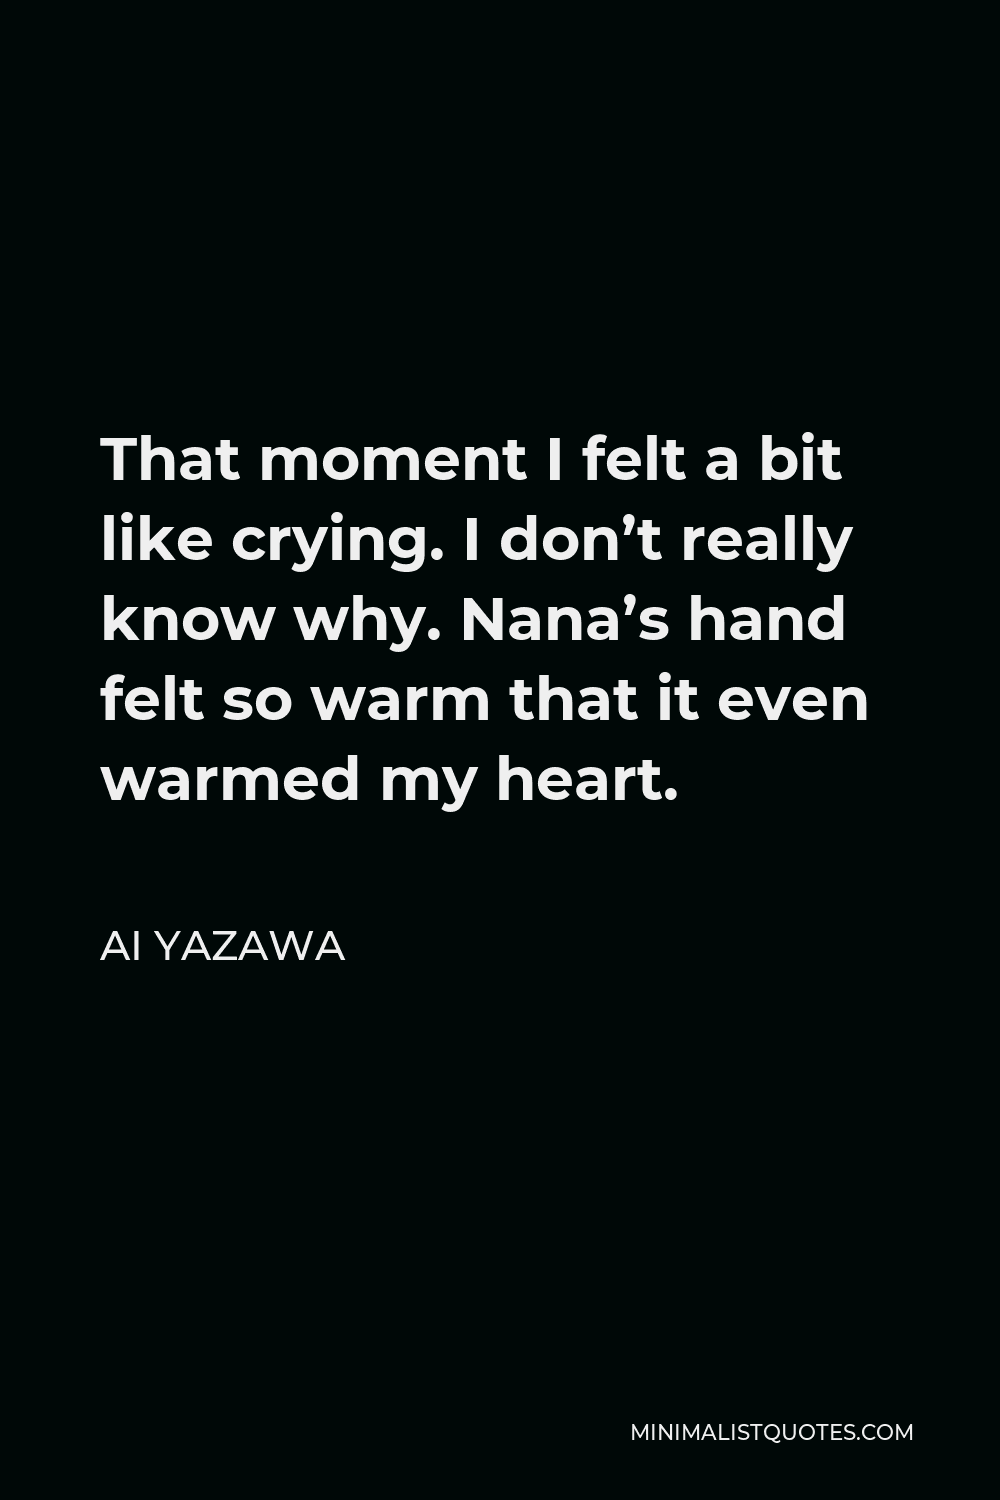 Ai Yazawa Quote - That moment I felt a bit like crying. I don’t really know why. Nana’s hand felt so warm that it even warmed my heart.